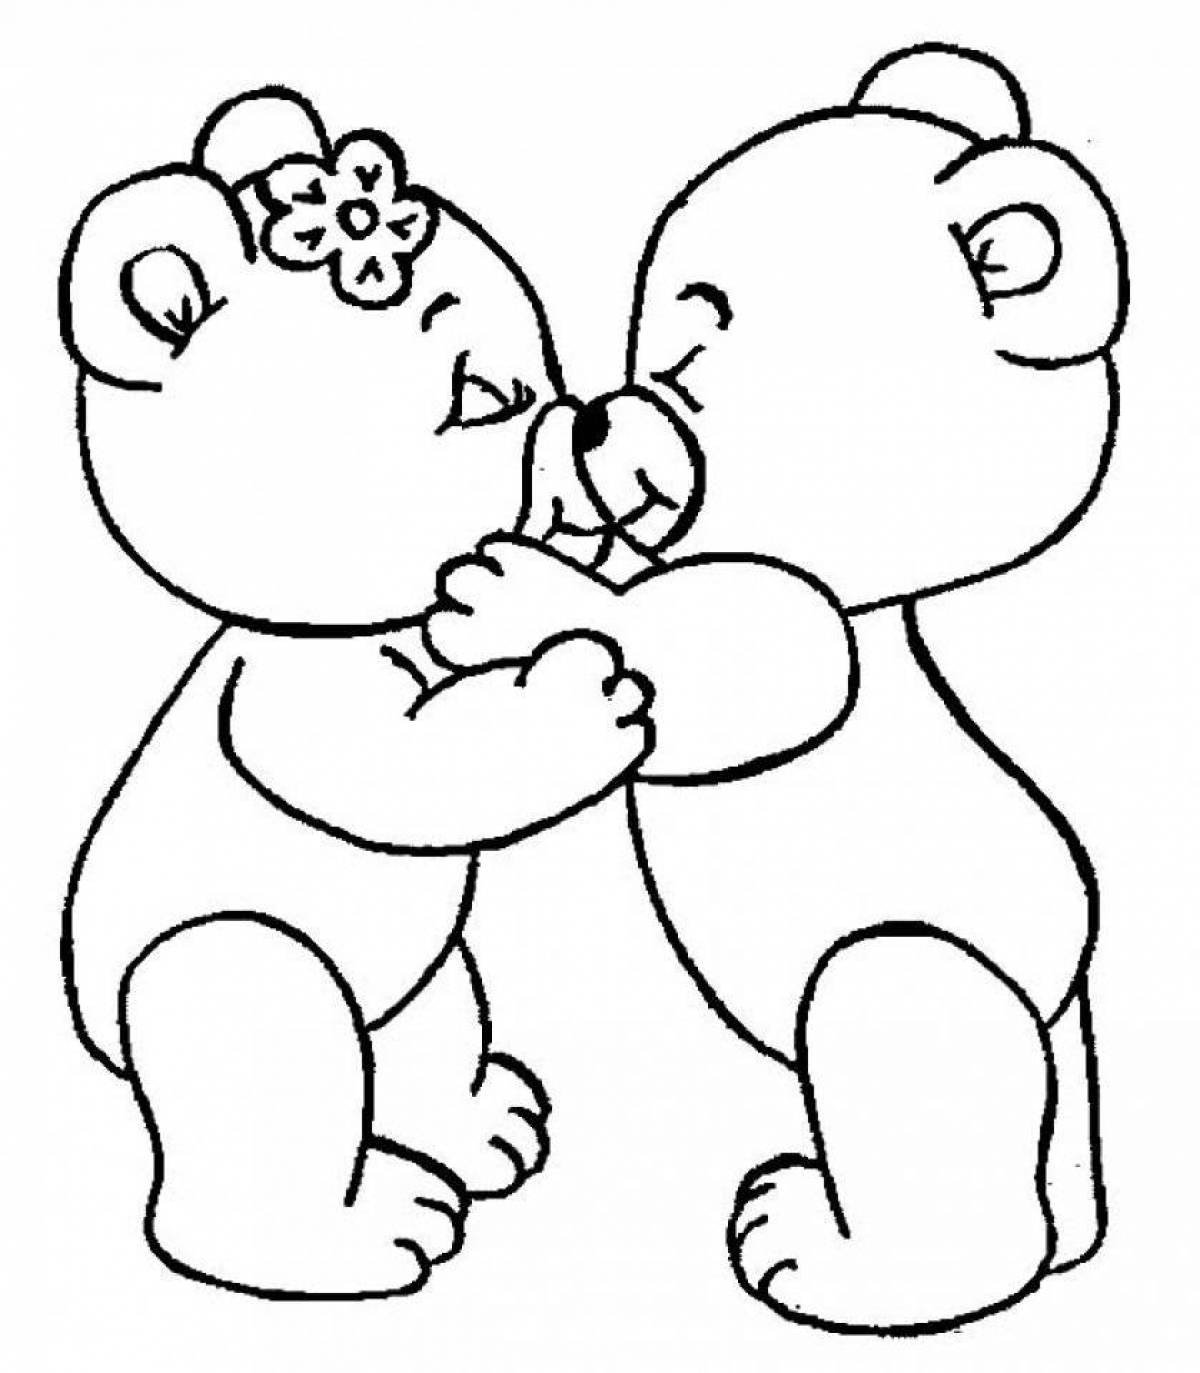 Joyful love coloring pages